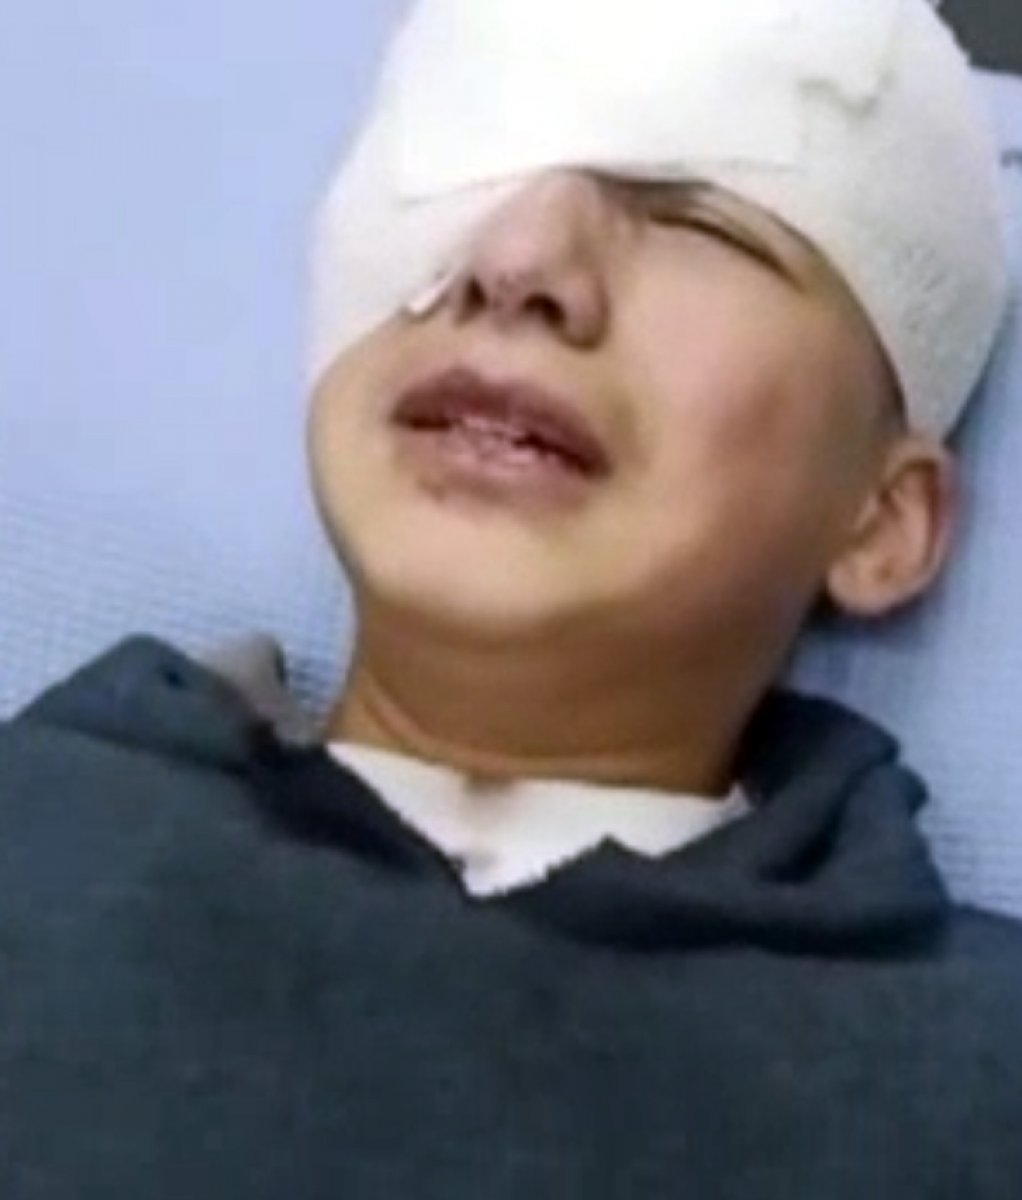 Israeli forces shot Palestinian boy in the eye with a rubber bullet #1